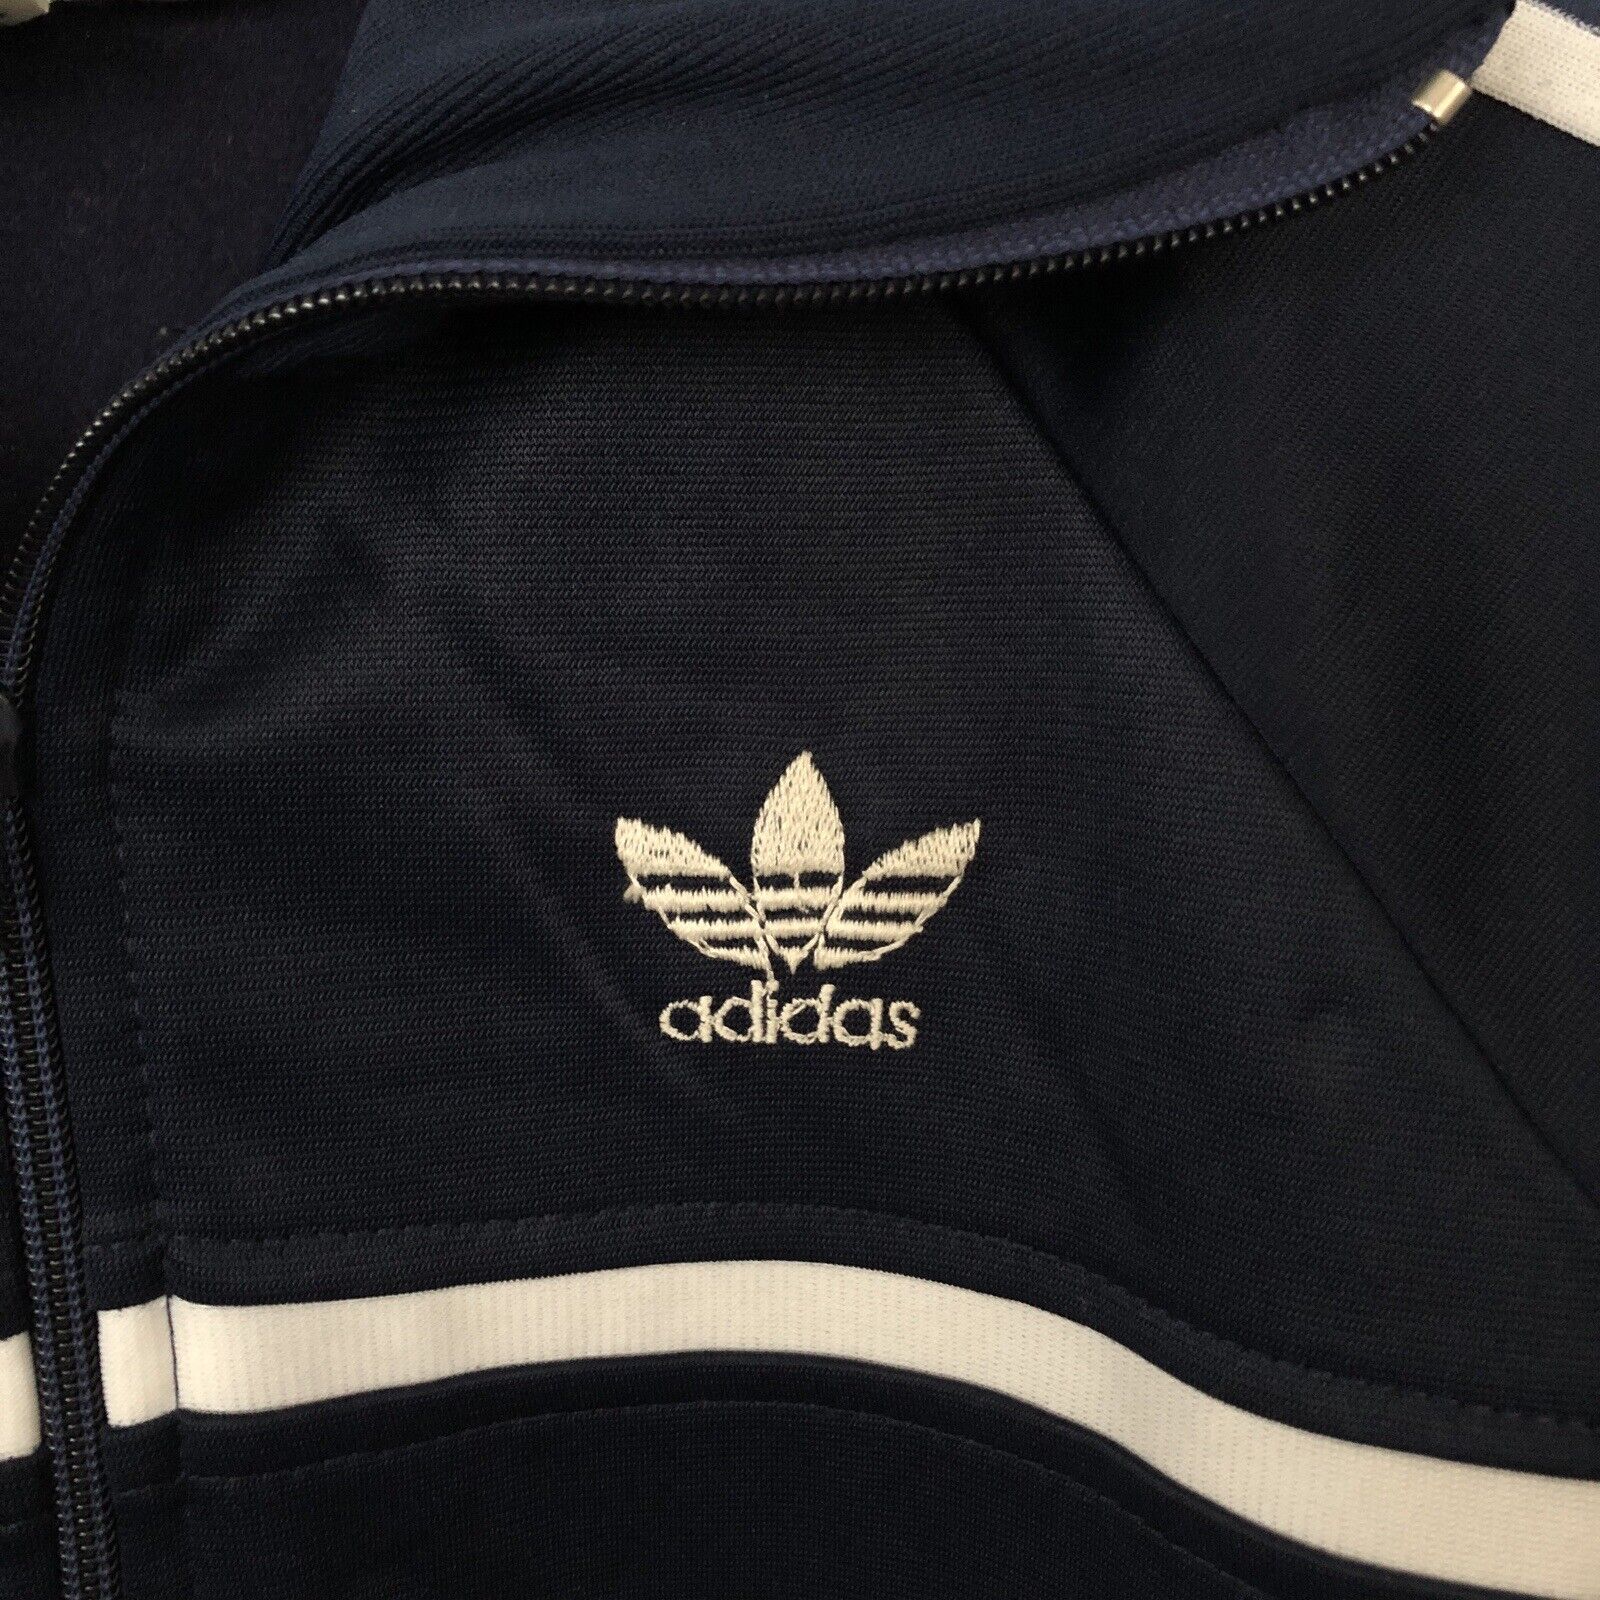 Rare 1970s-1980s Adidas Zip Up Track Jacket 3 Stripes Navy Made in 